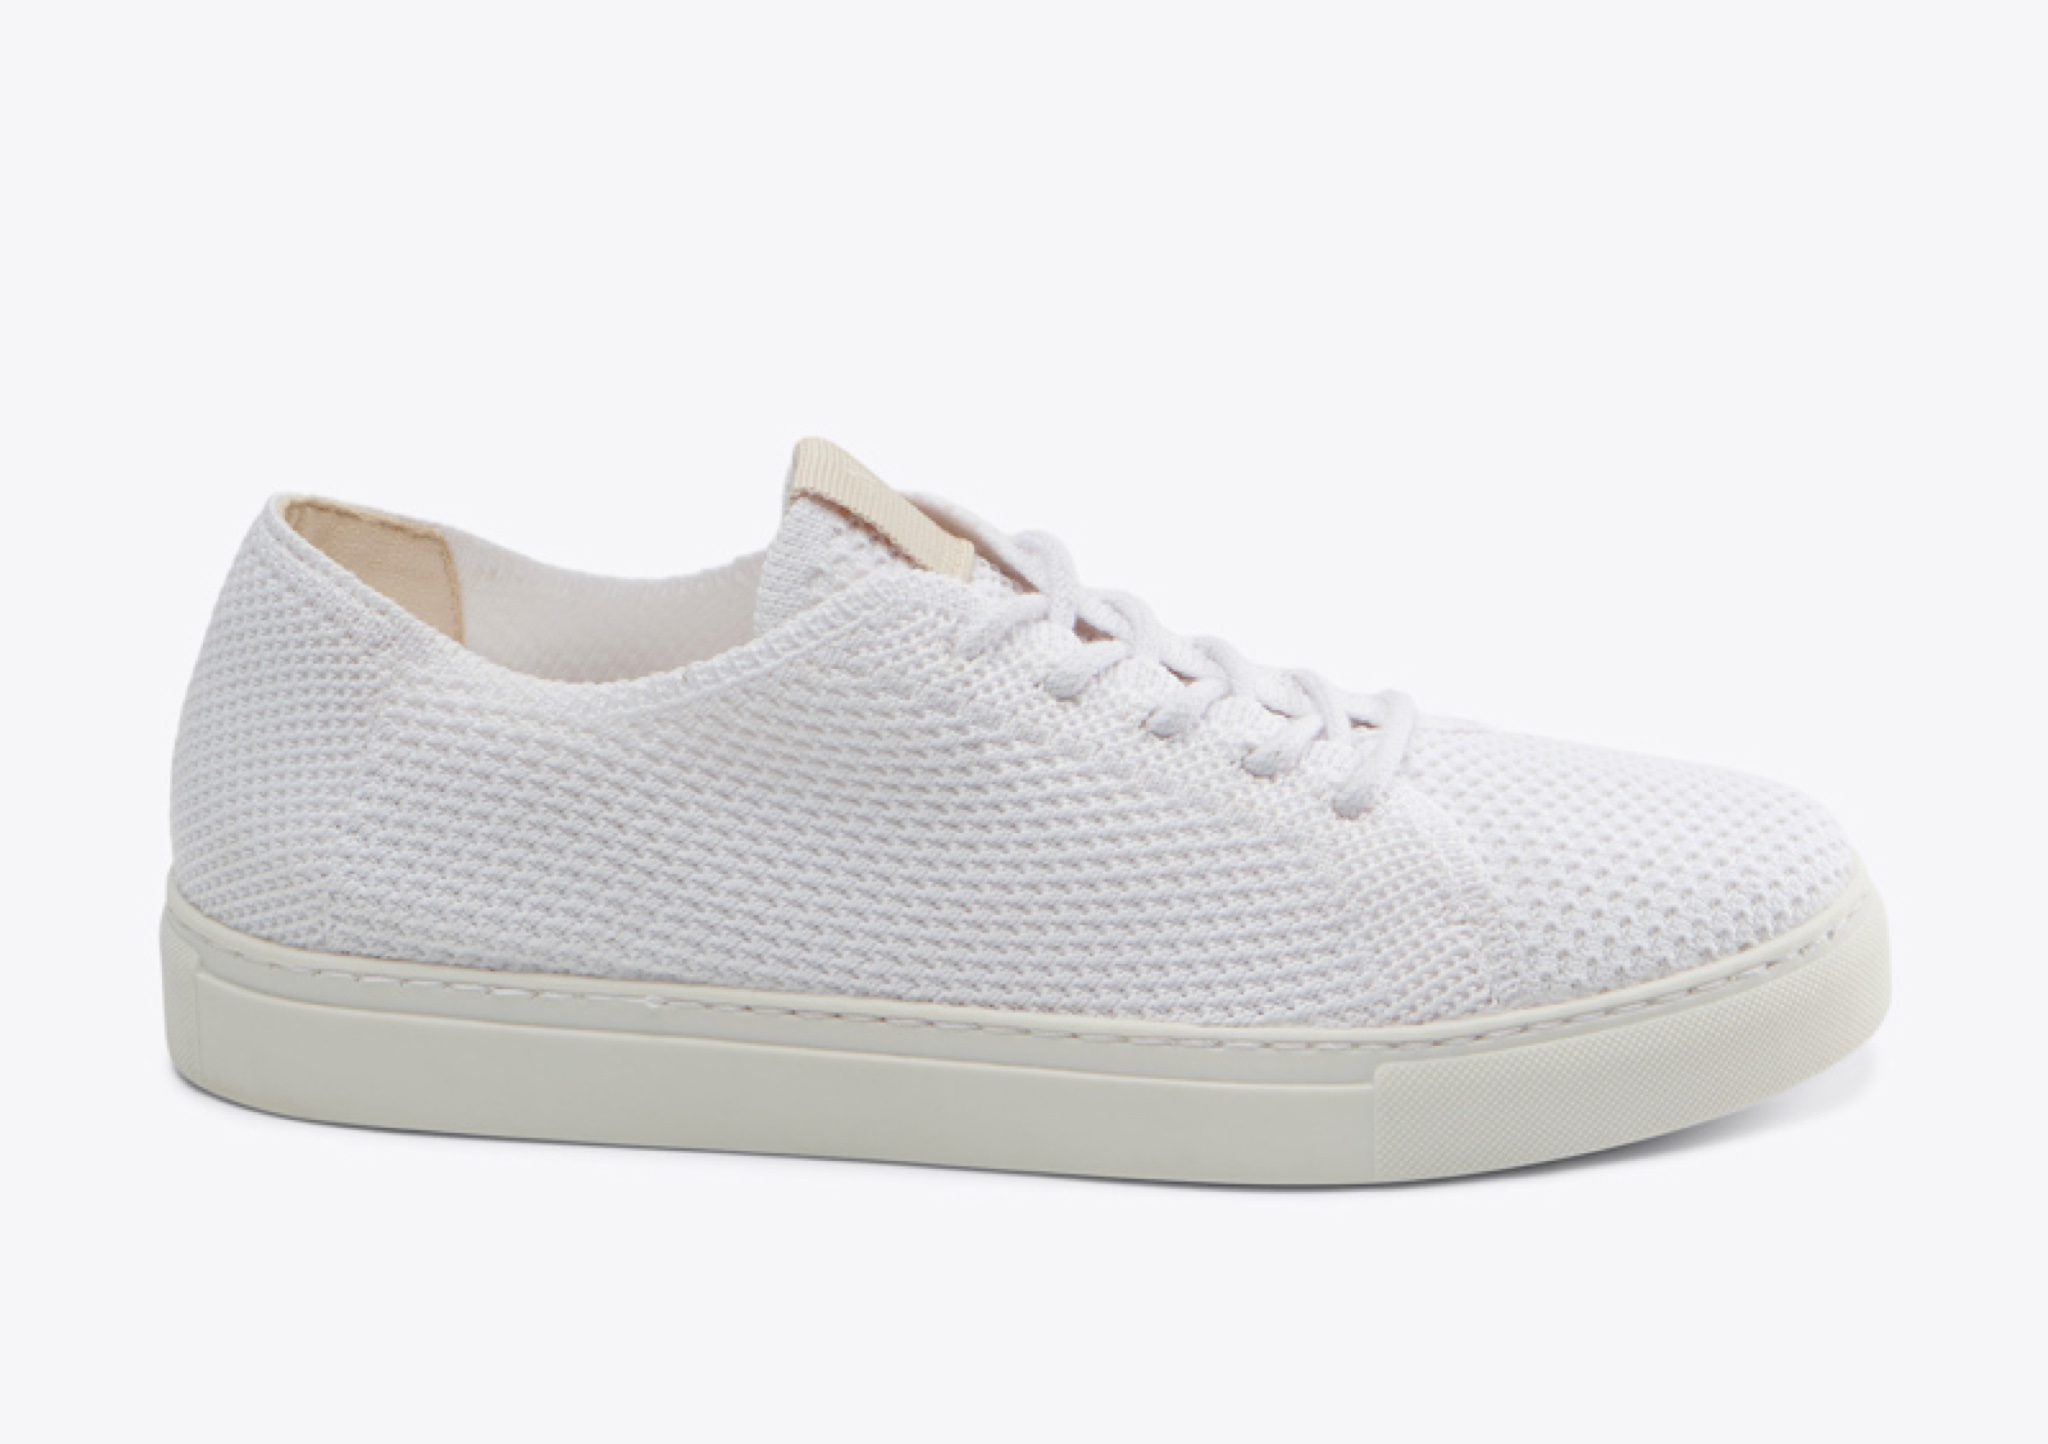 Nisolo Women's Go-To Eco-Knit Sneaker White - Every Nisolo product is built on the foundation of comfort, function, and design. 